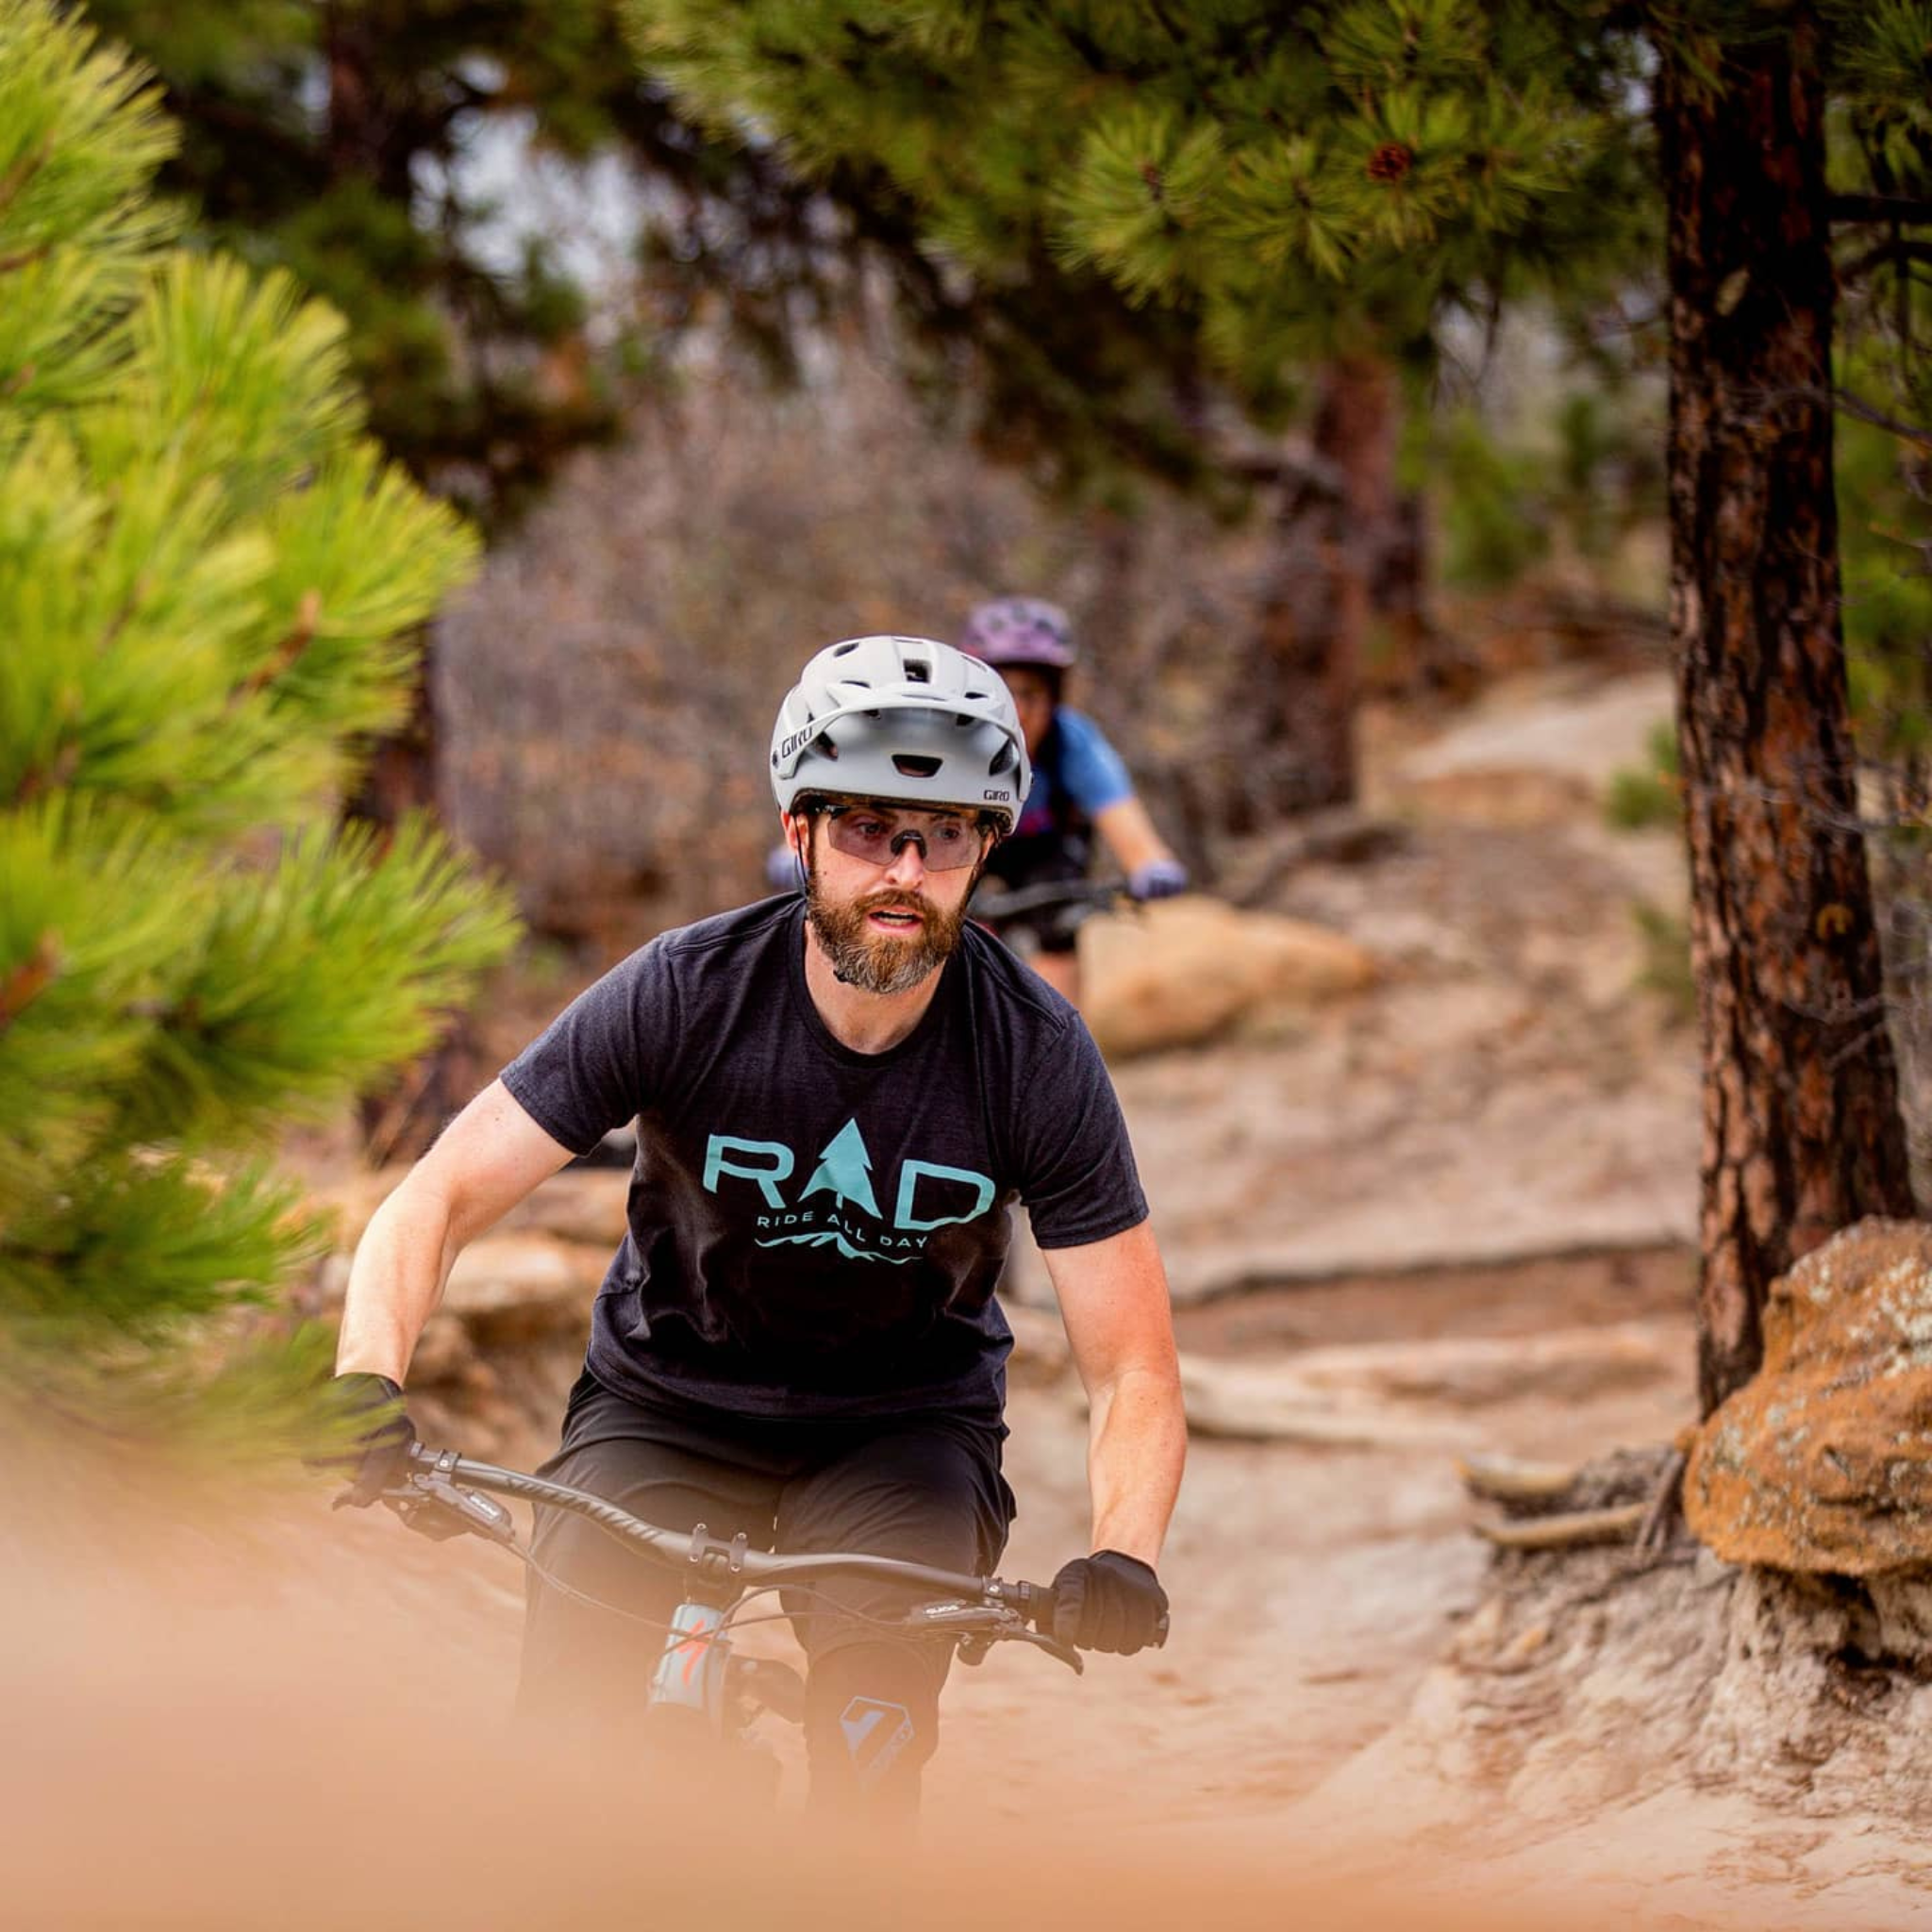 Ride All Day Apparel t-shirt in Turquoise color